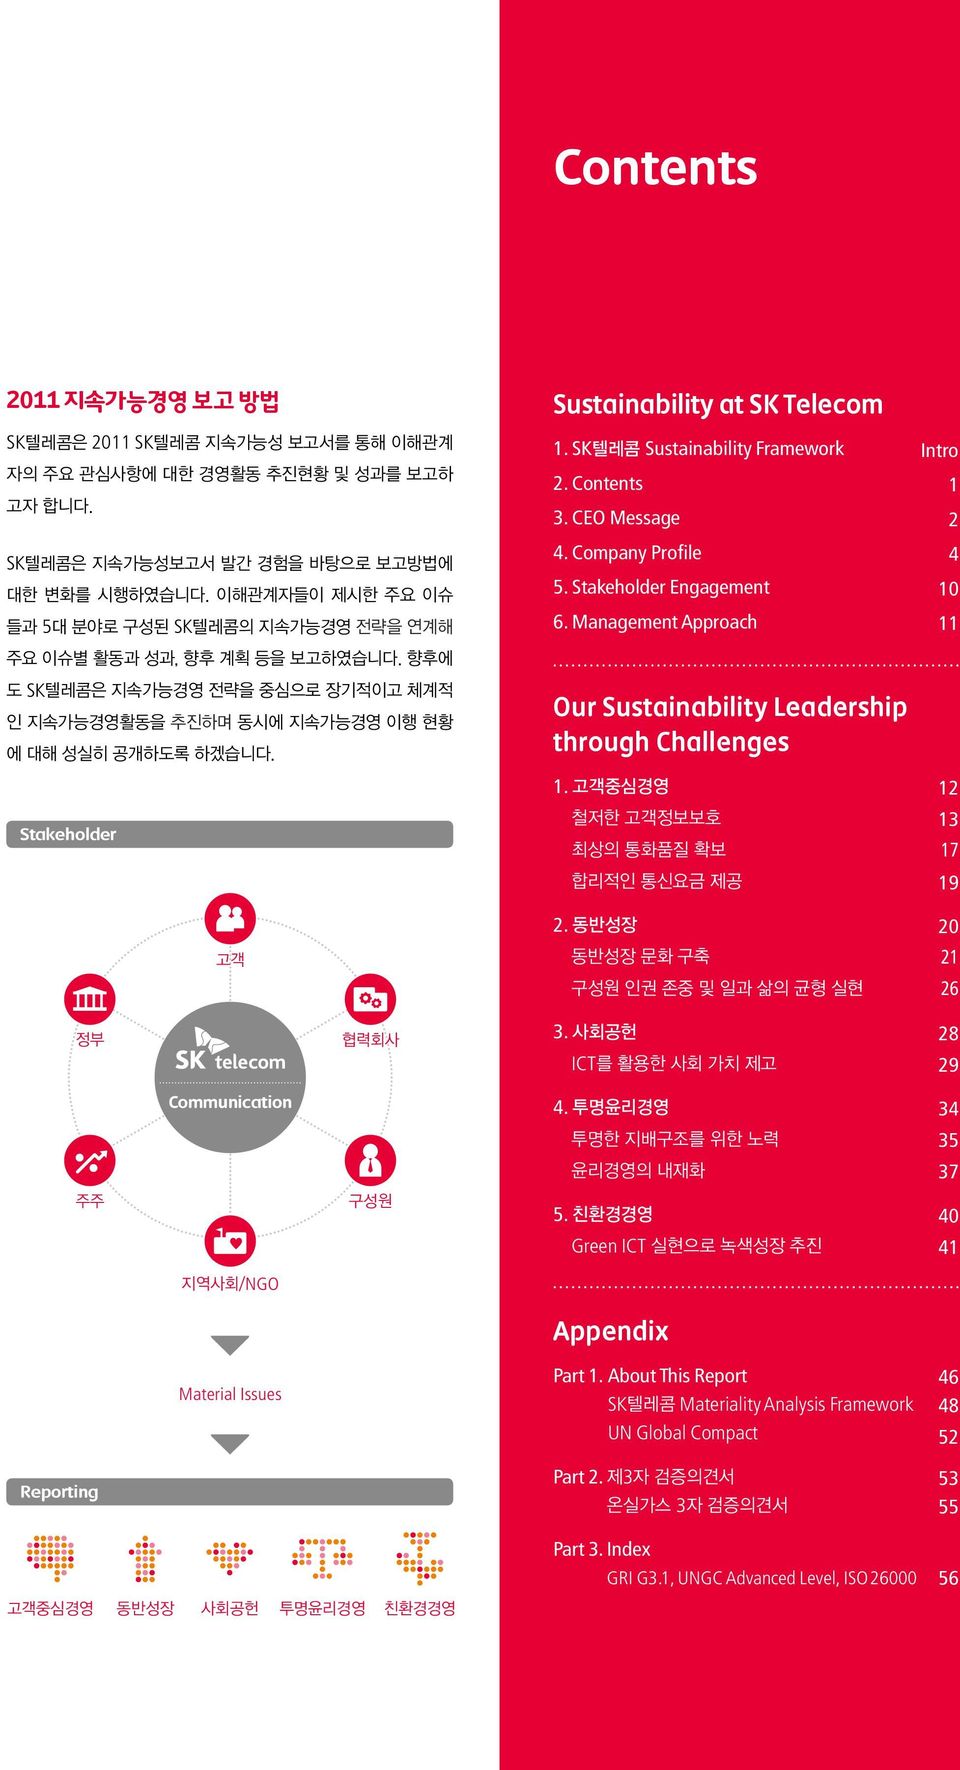 Stakeholder 고객 Sustainability at SK Telecom 1. SK텔레콤 Sustainability Framework 2. Contents 3. CEO Message 4. Company Profile 5. Stakeholder Engagement 6.